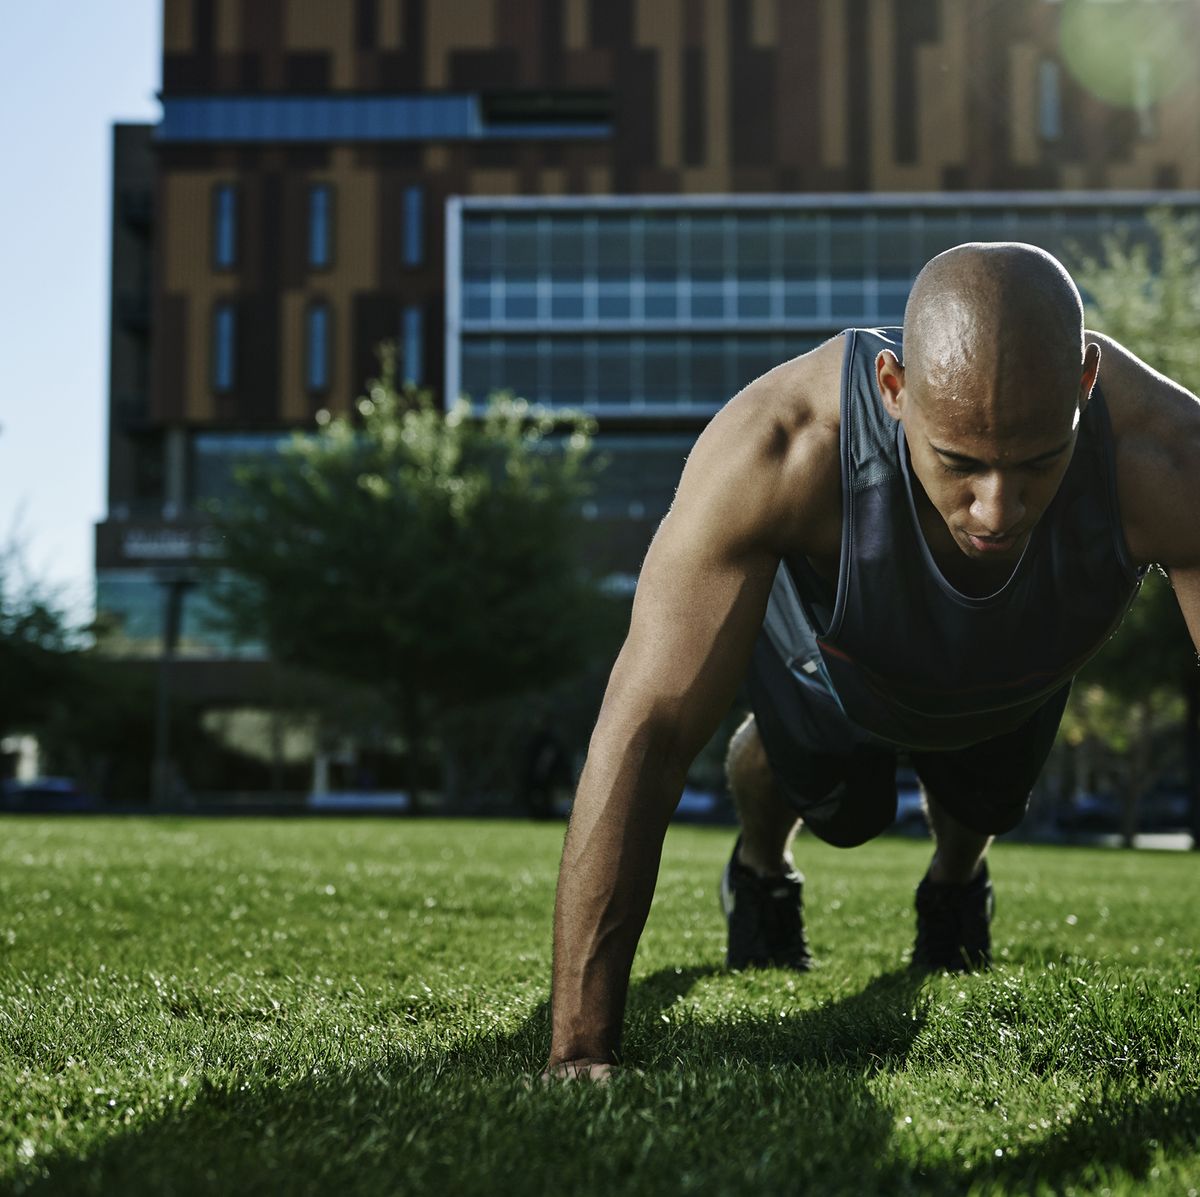 What Muscles Do Pushups Work? A Fitness Trainer Explains